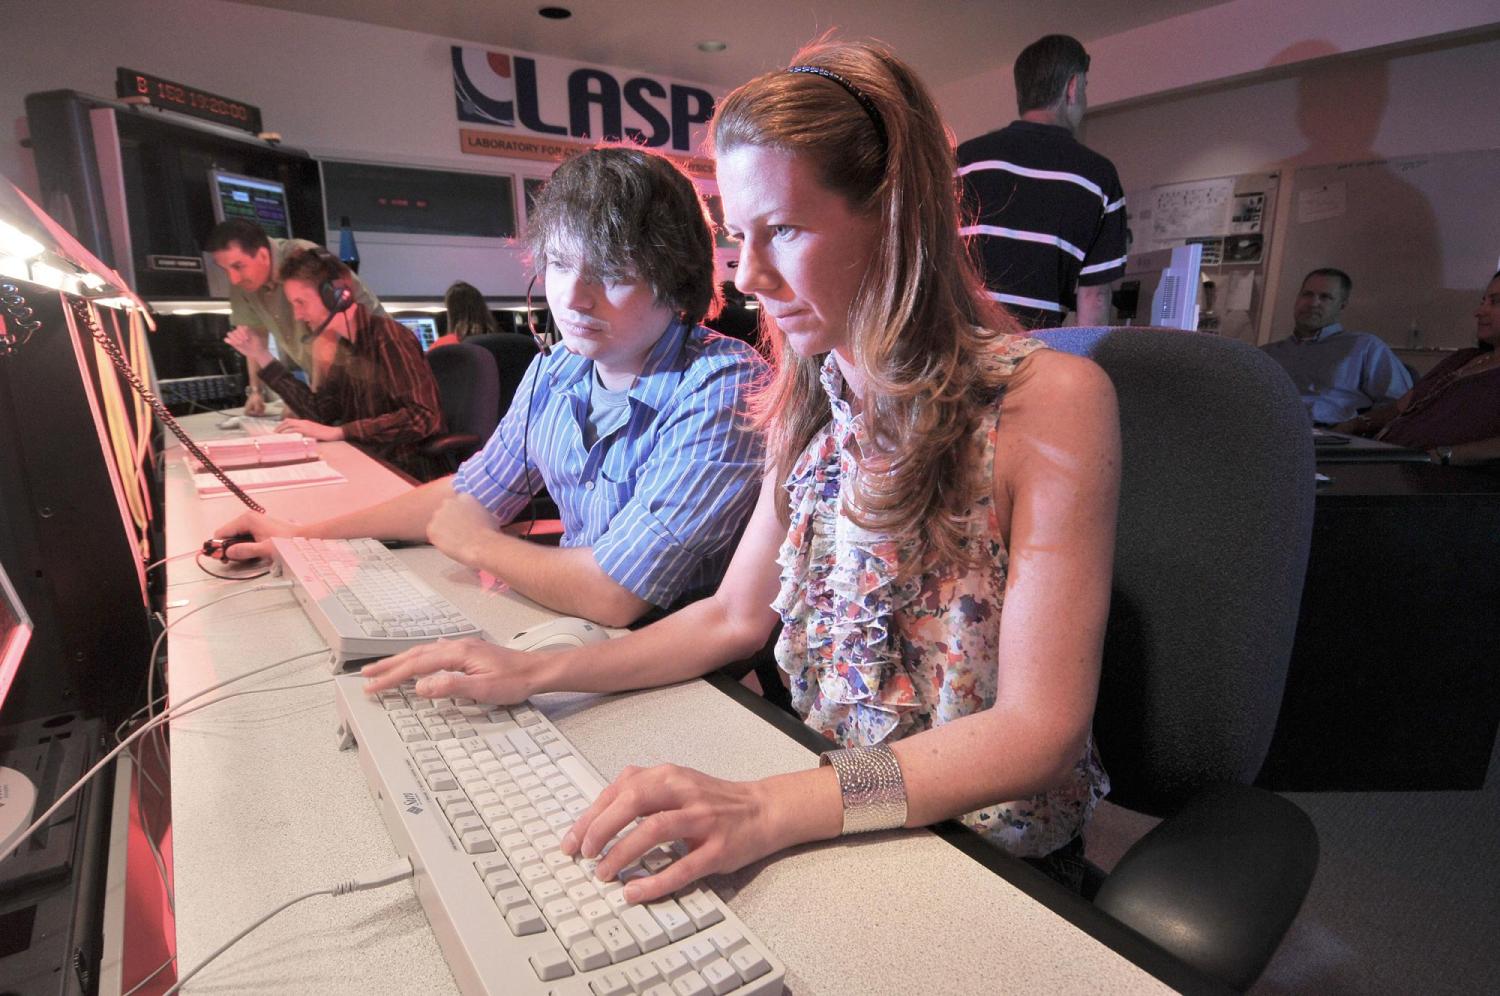 Faculty member works with student in LASP’s Mission Operations center